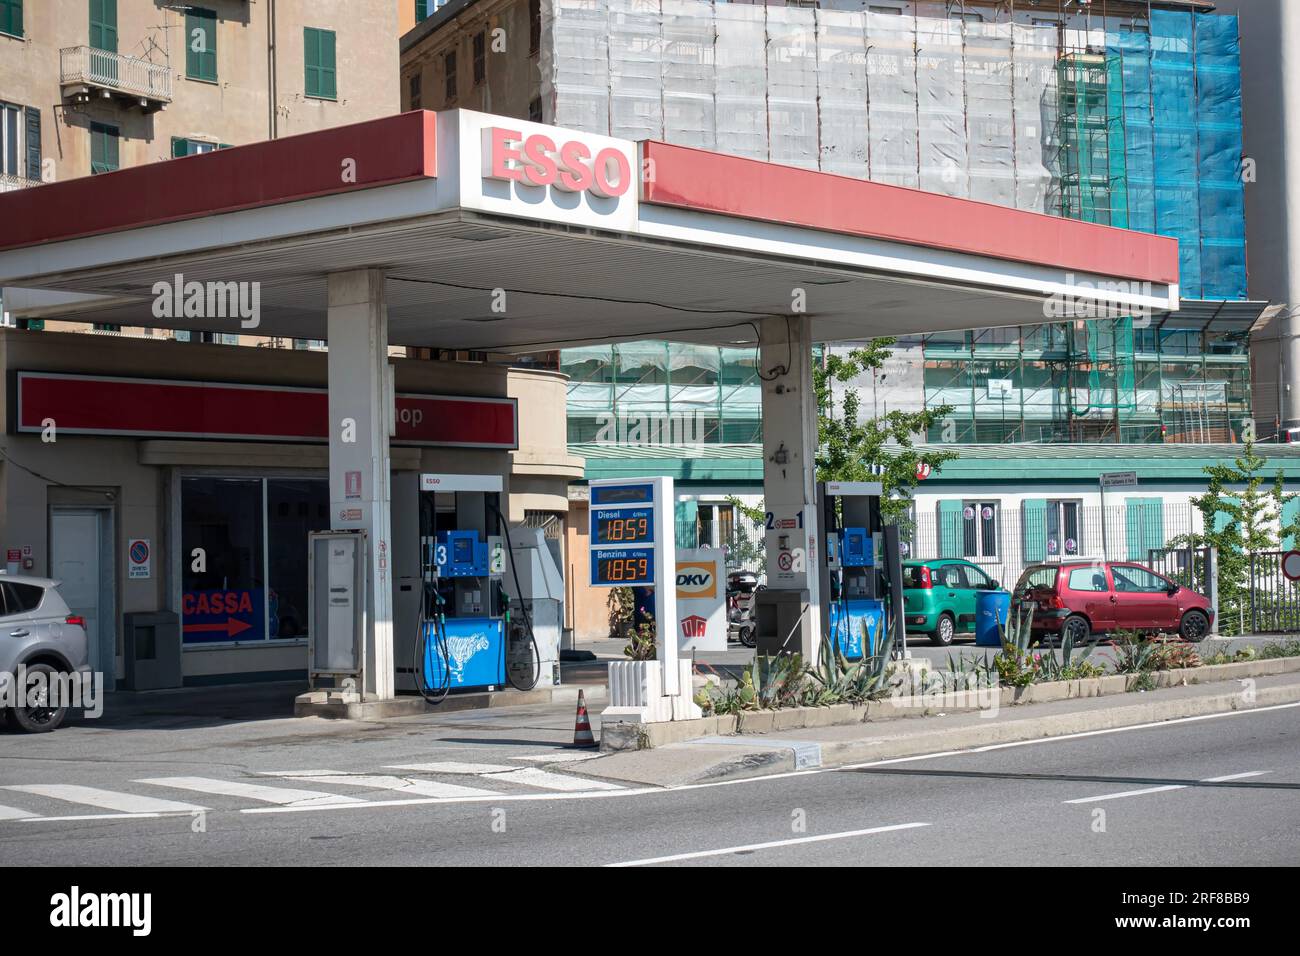 Savona, Italy - May 4, 2022: Esso gas station. Esso is a trading name for ExxonMobil. Stock Photo